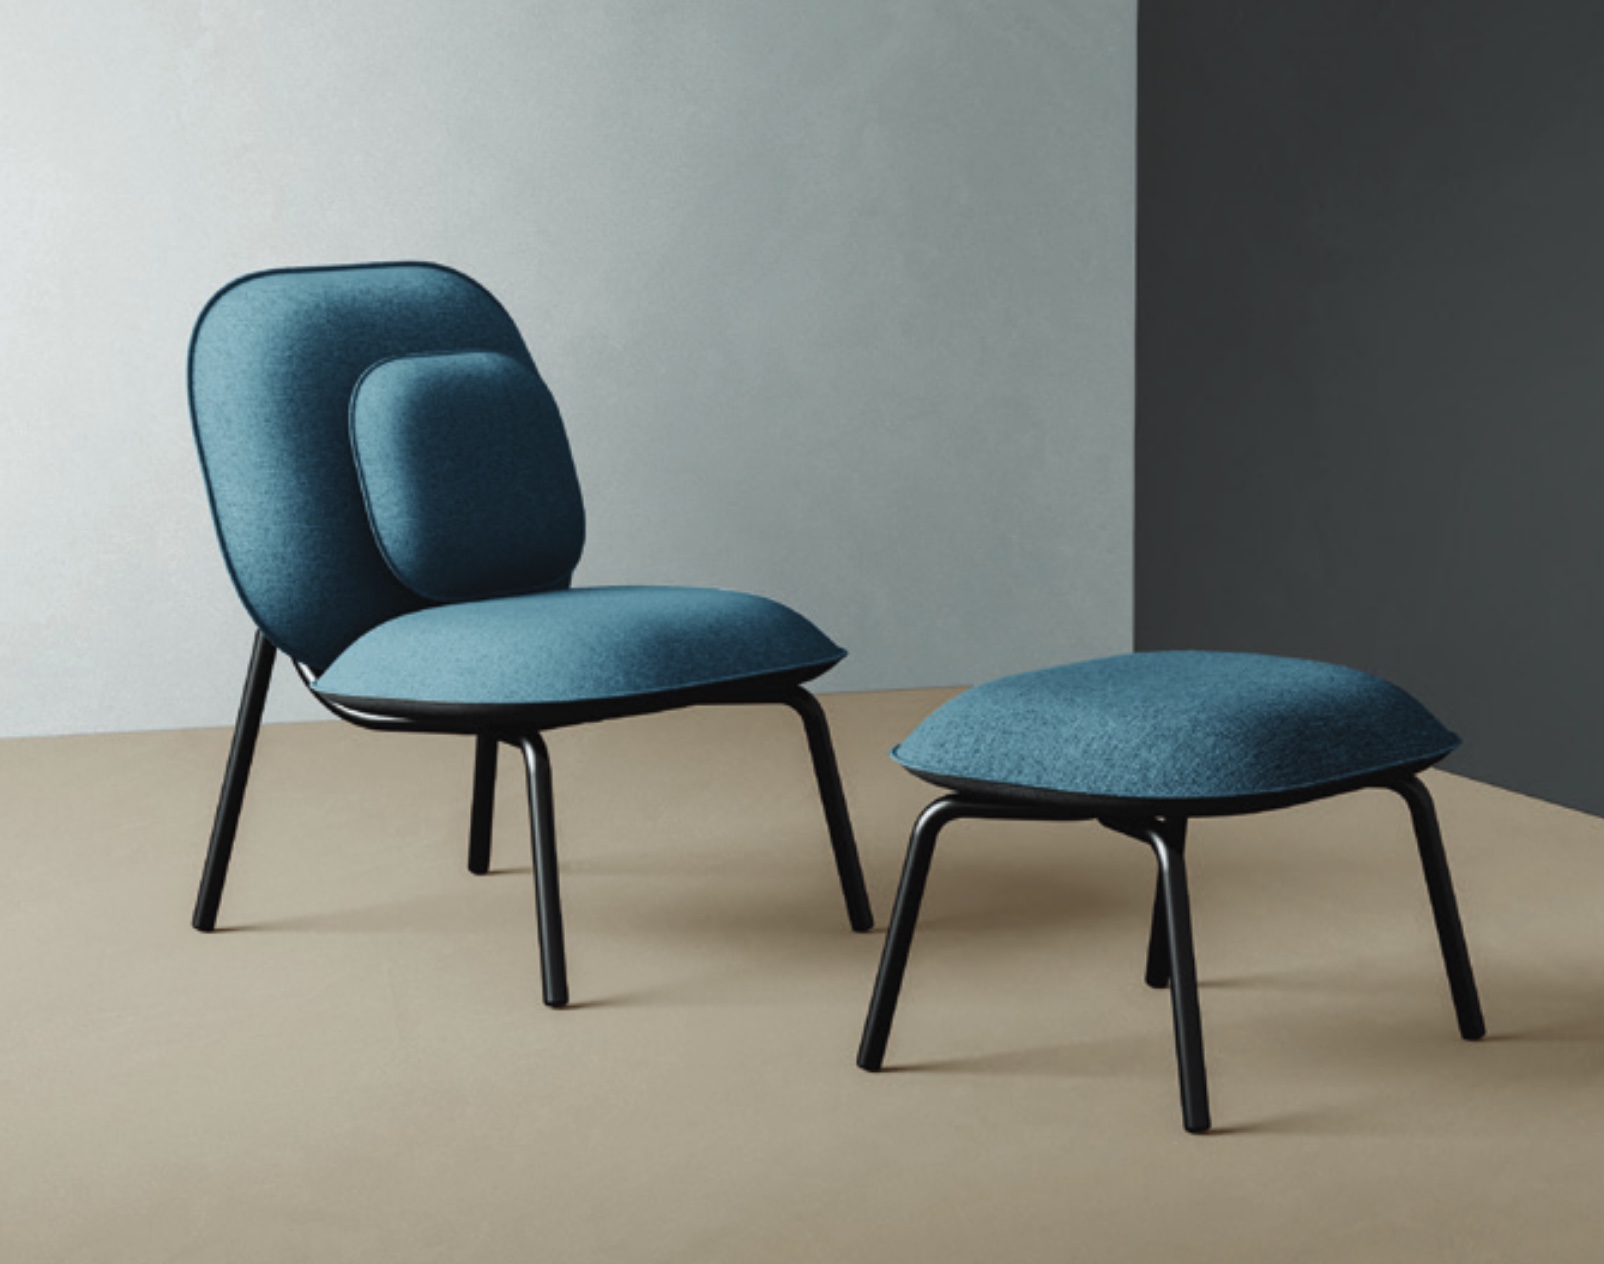 Do Nothing and Take it Easy in Toou’s Tasca Chair